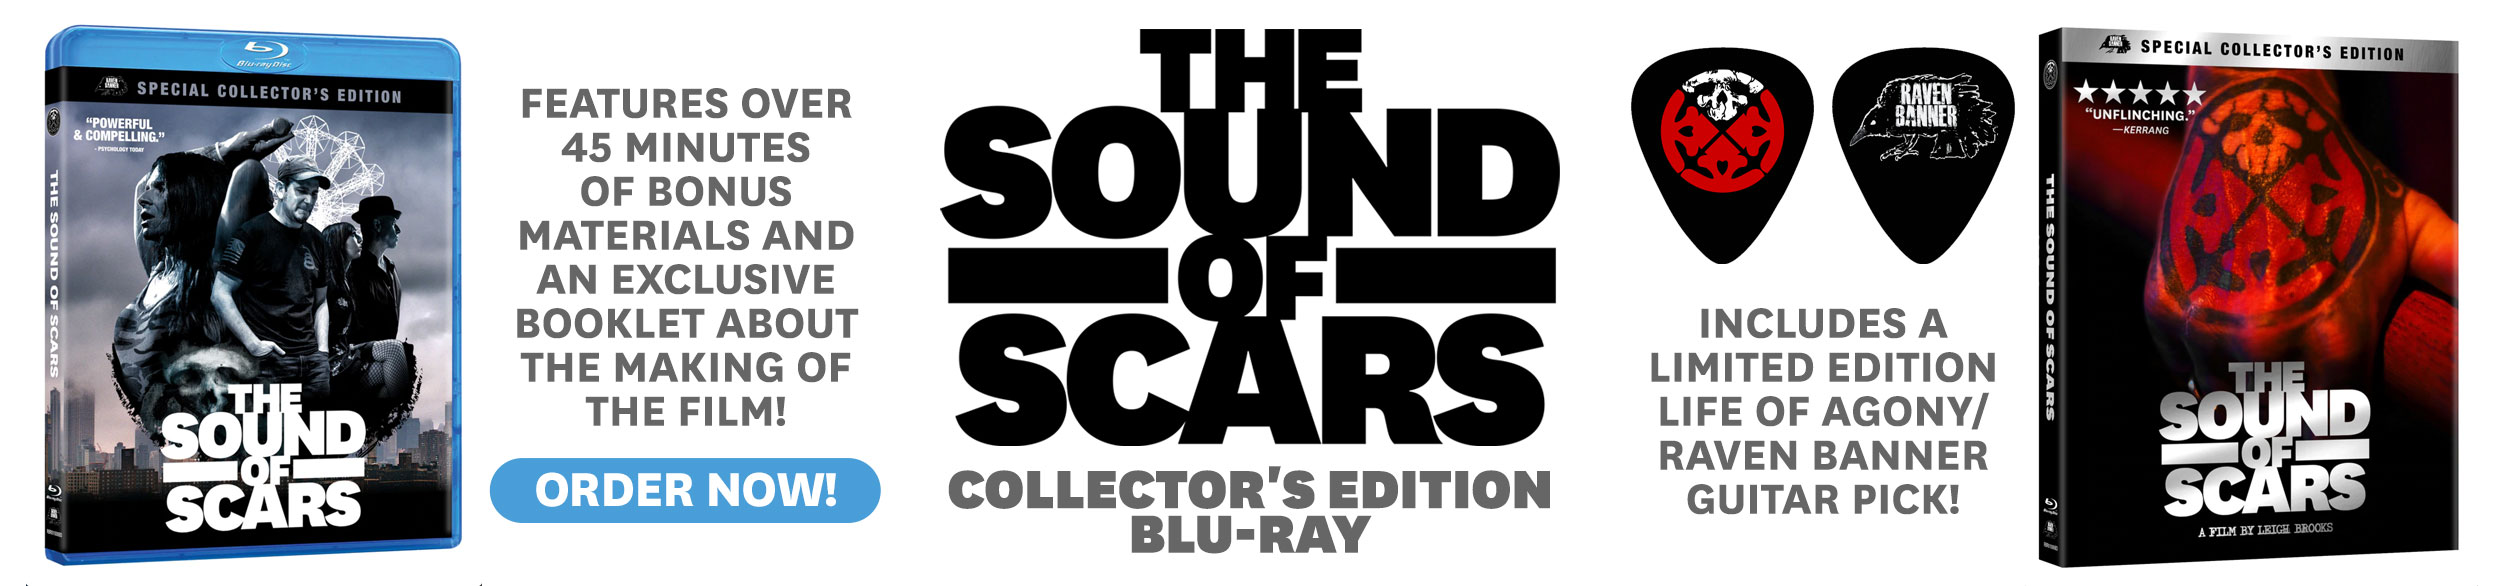 Life of Agony 'The Sound of Scars' Blu-Ray